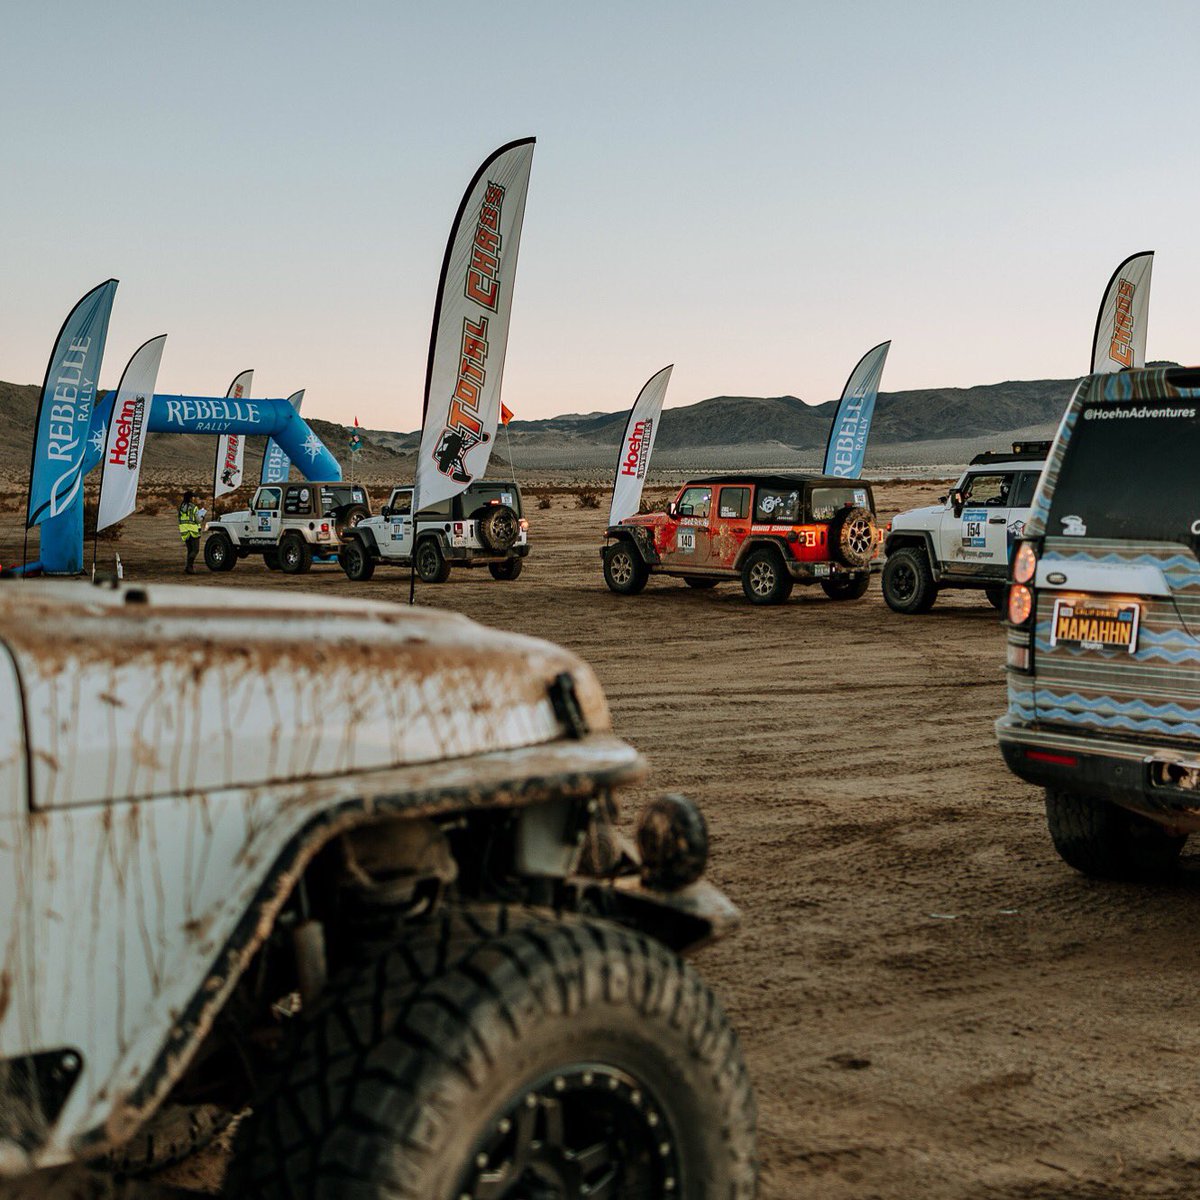 #Team_RLT has crossed the finish line of the 2018 @rebellerally!

Congrats to all Rebelle teams on such an amazing accomplishment! 

Keep an eye out for a tweet w/ Team RLT’s final results. 

#RebelleRally2018 #navigation #offroad #4x4 #girlgetoutside #adventure #womensadventure